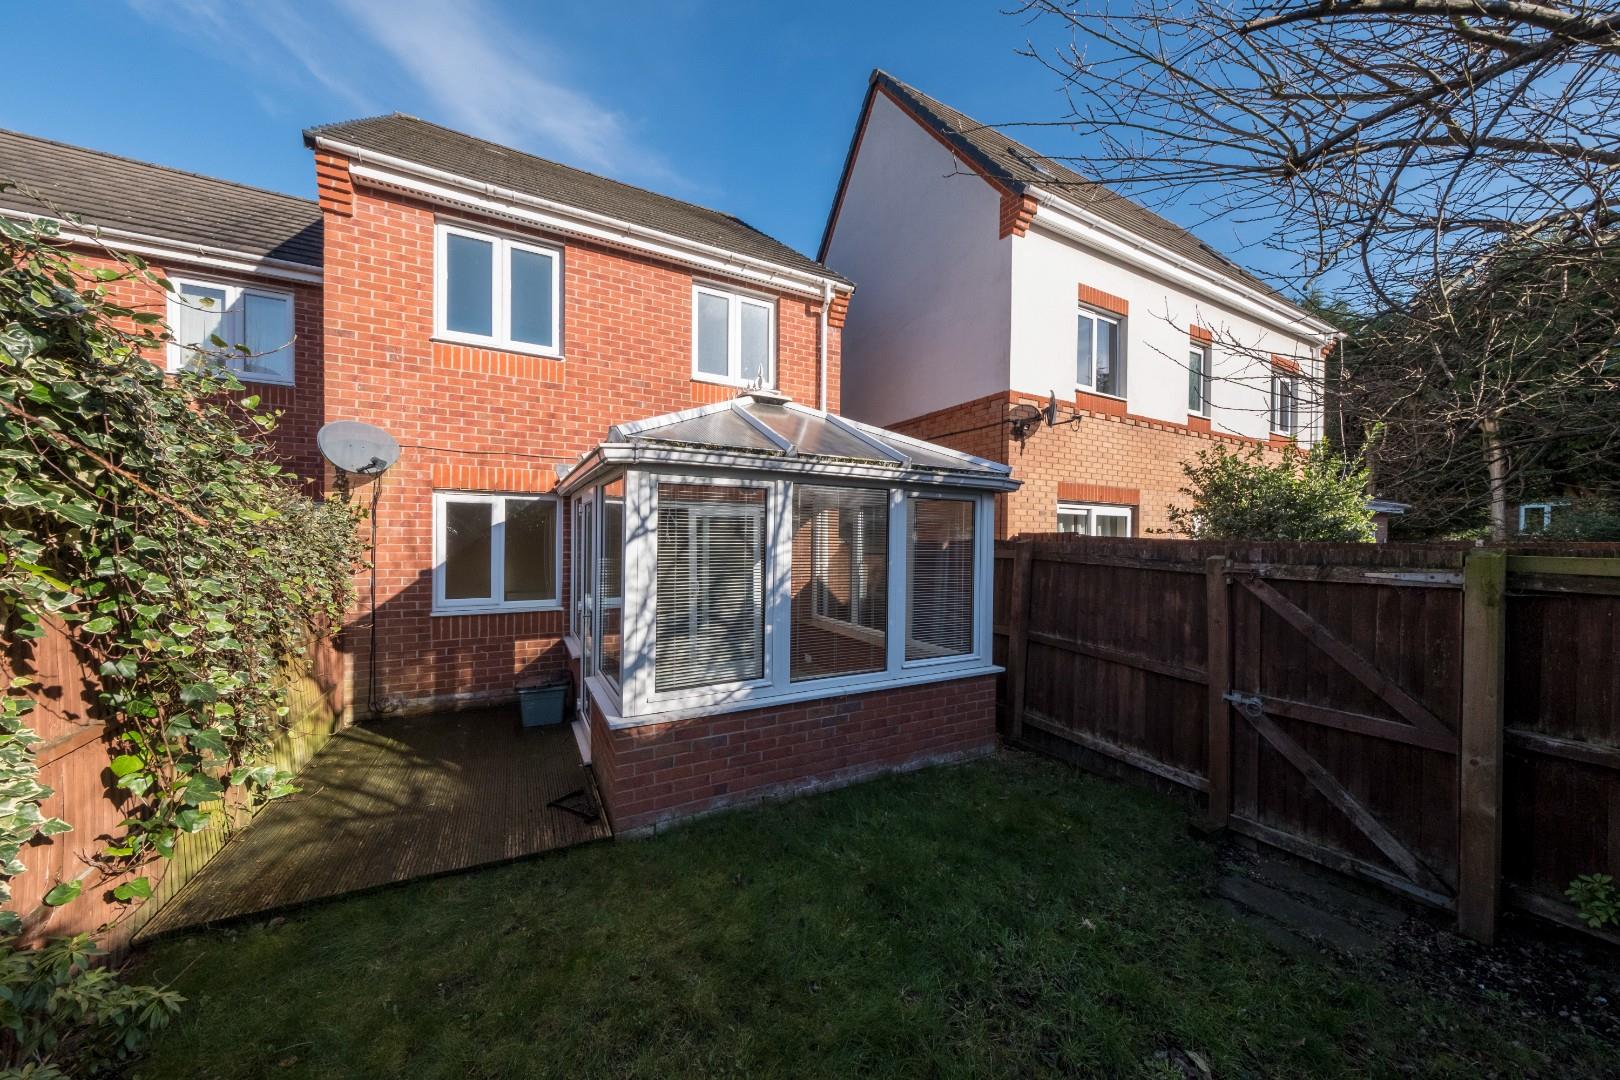 3 bedroom  Semi Detached House for Sale in Helsby